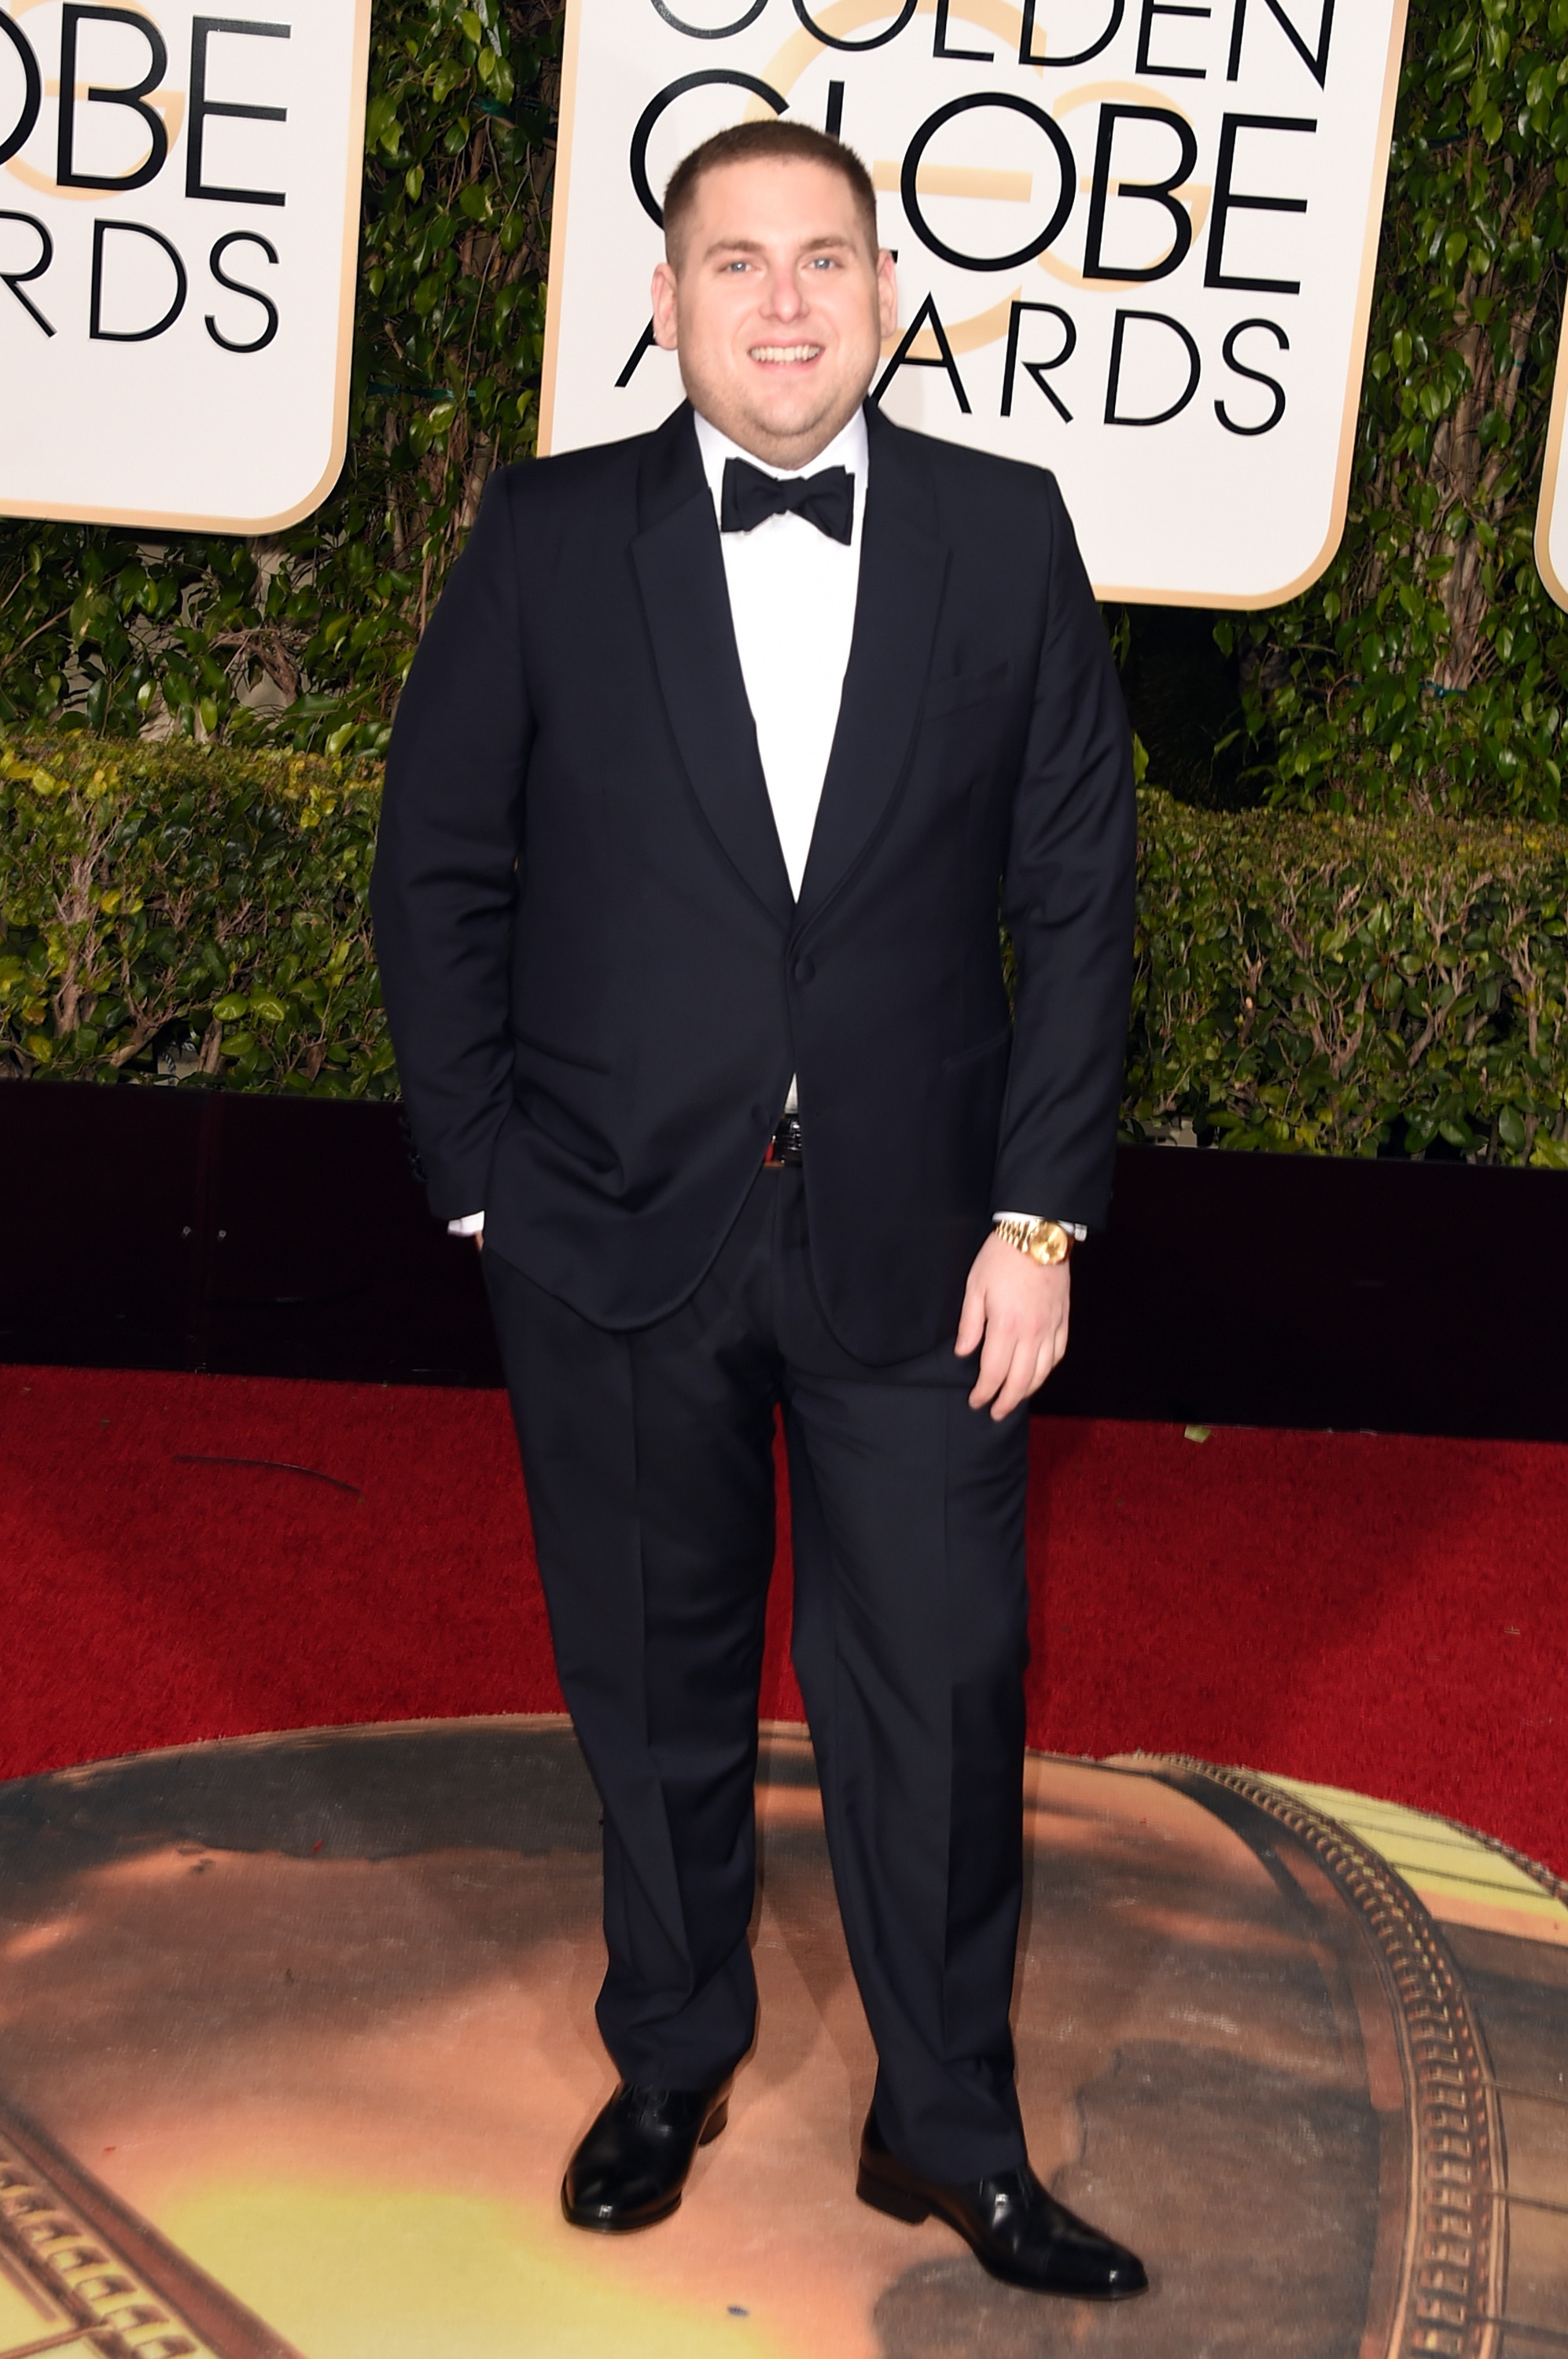 Jonah Hill arrives to the 73rd Annual Golden Globe Awards on Jan. 10, 2016 in Beverly Hills.